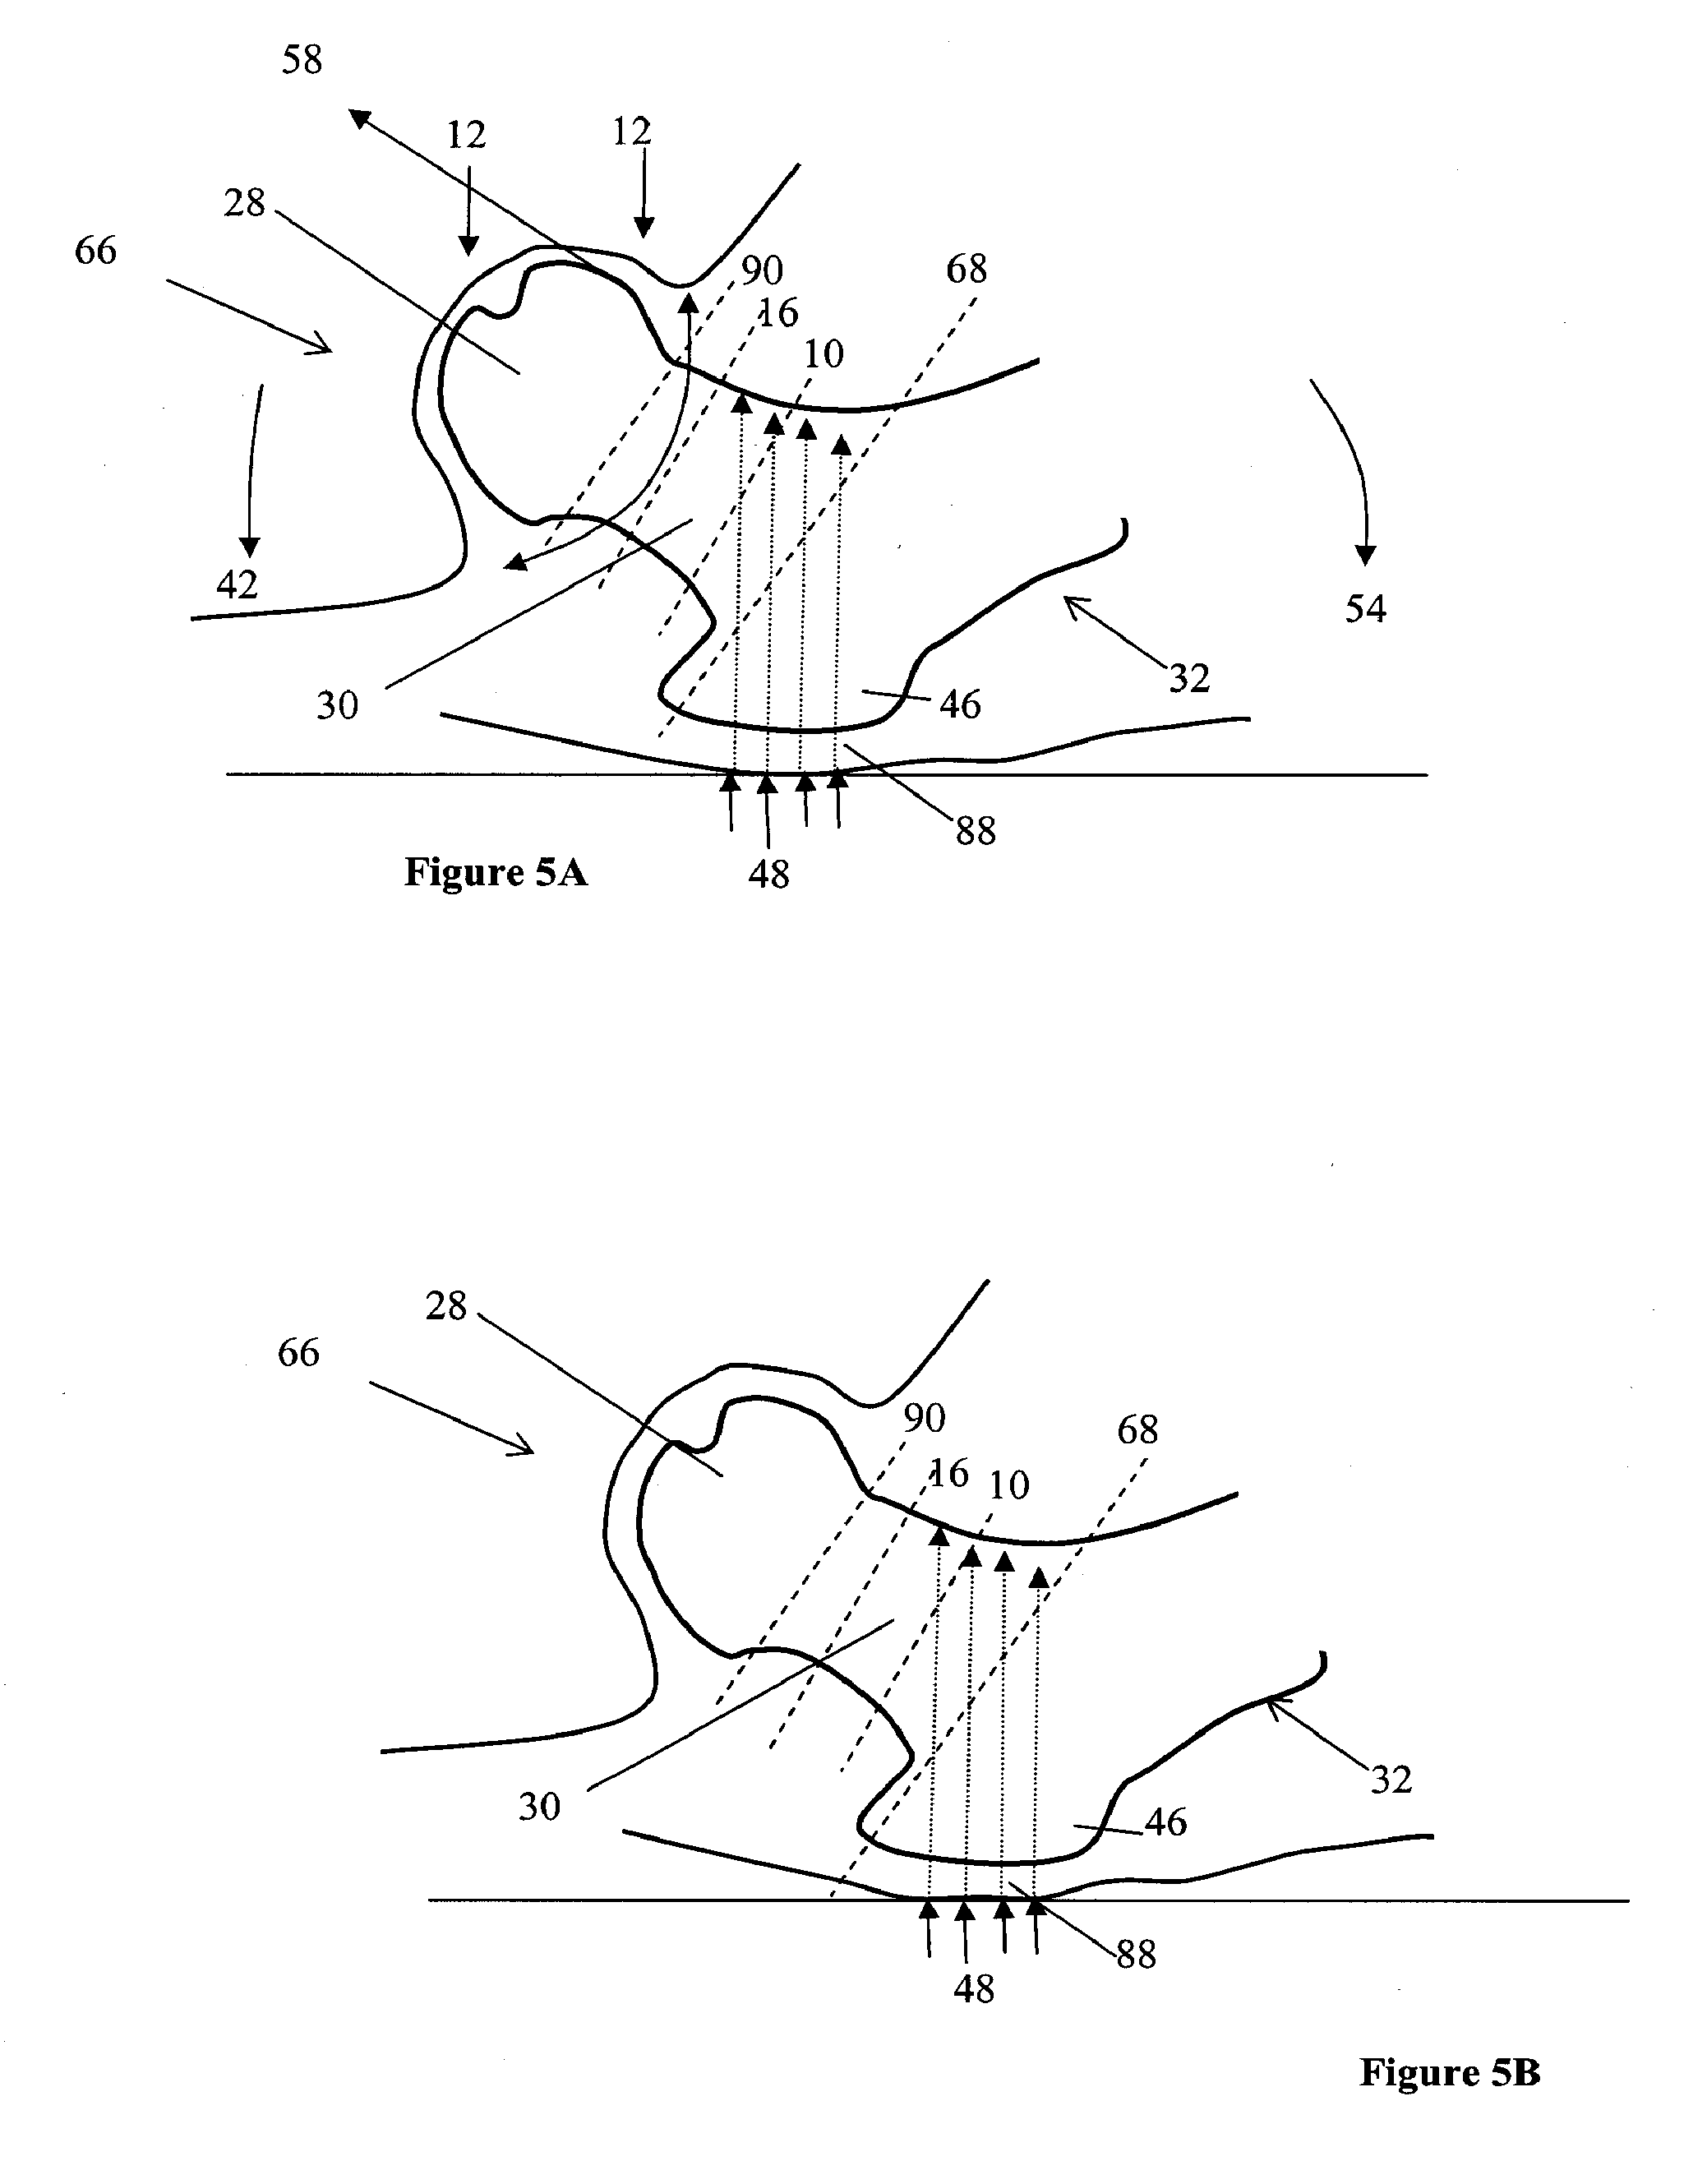 Bone support devices and methods